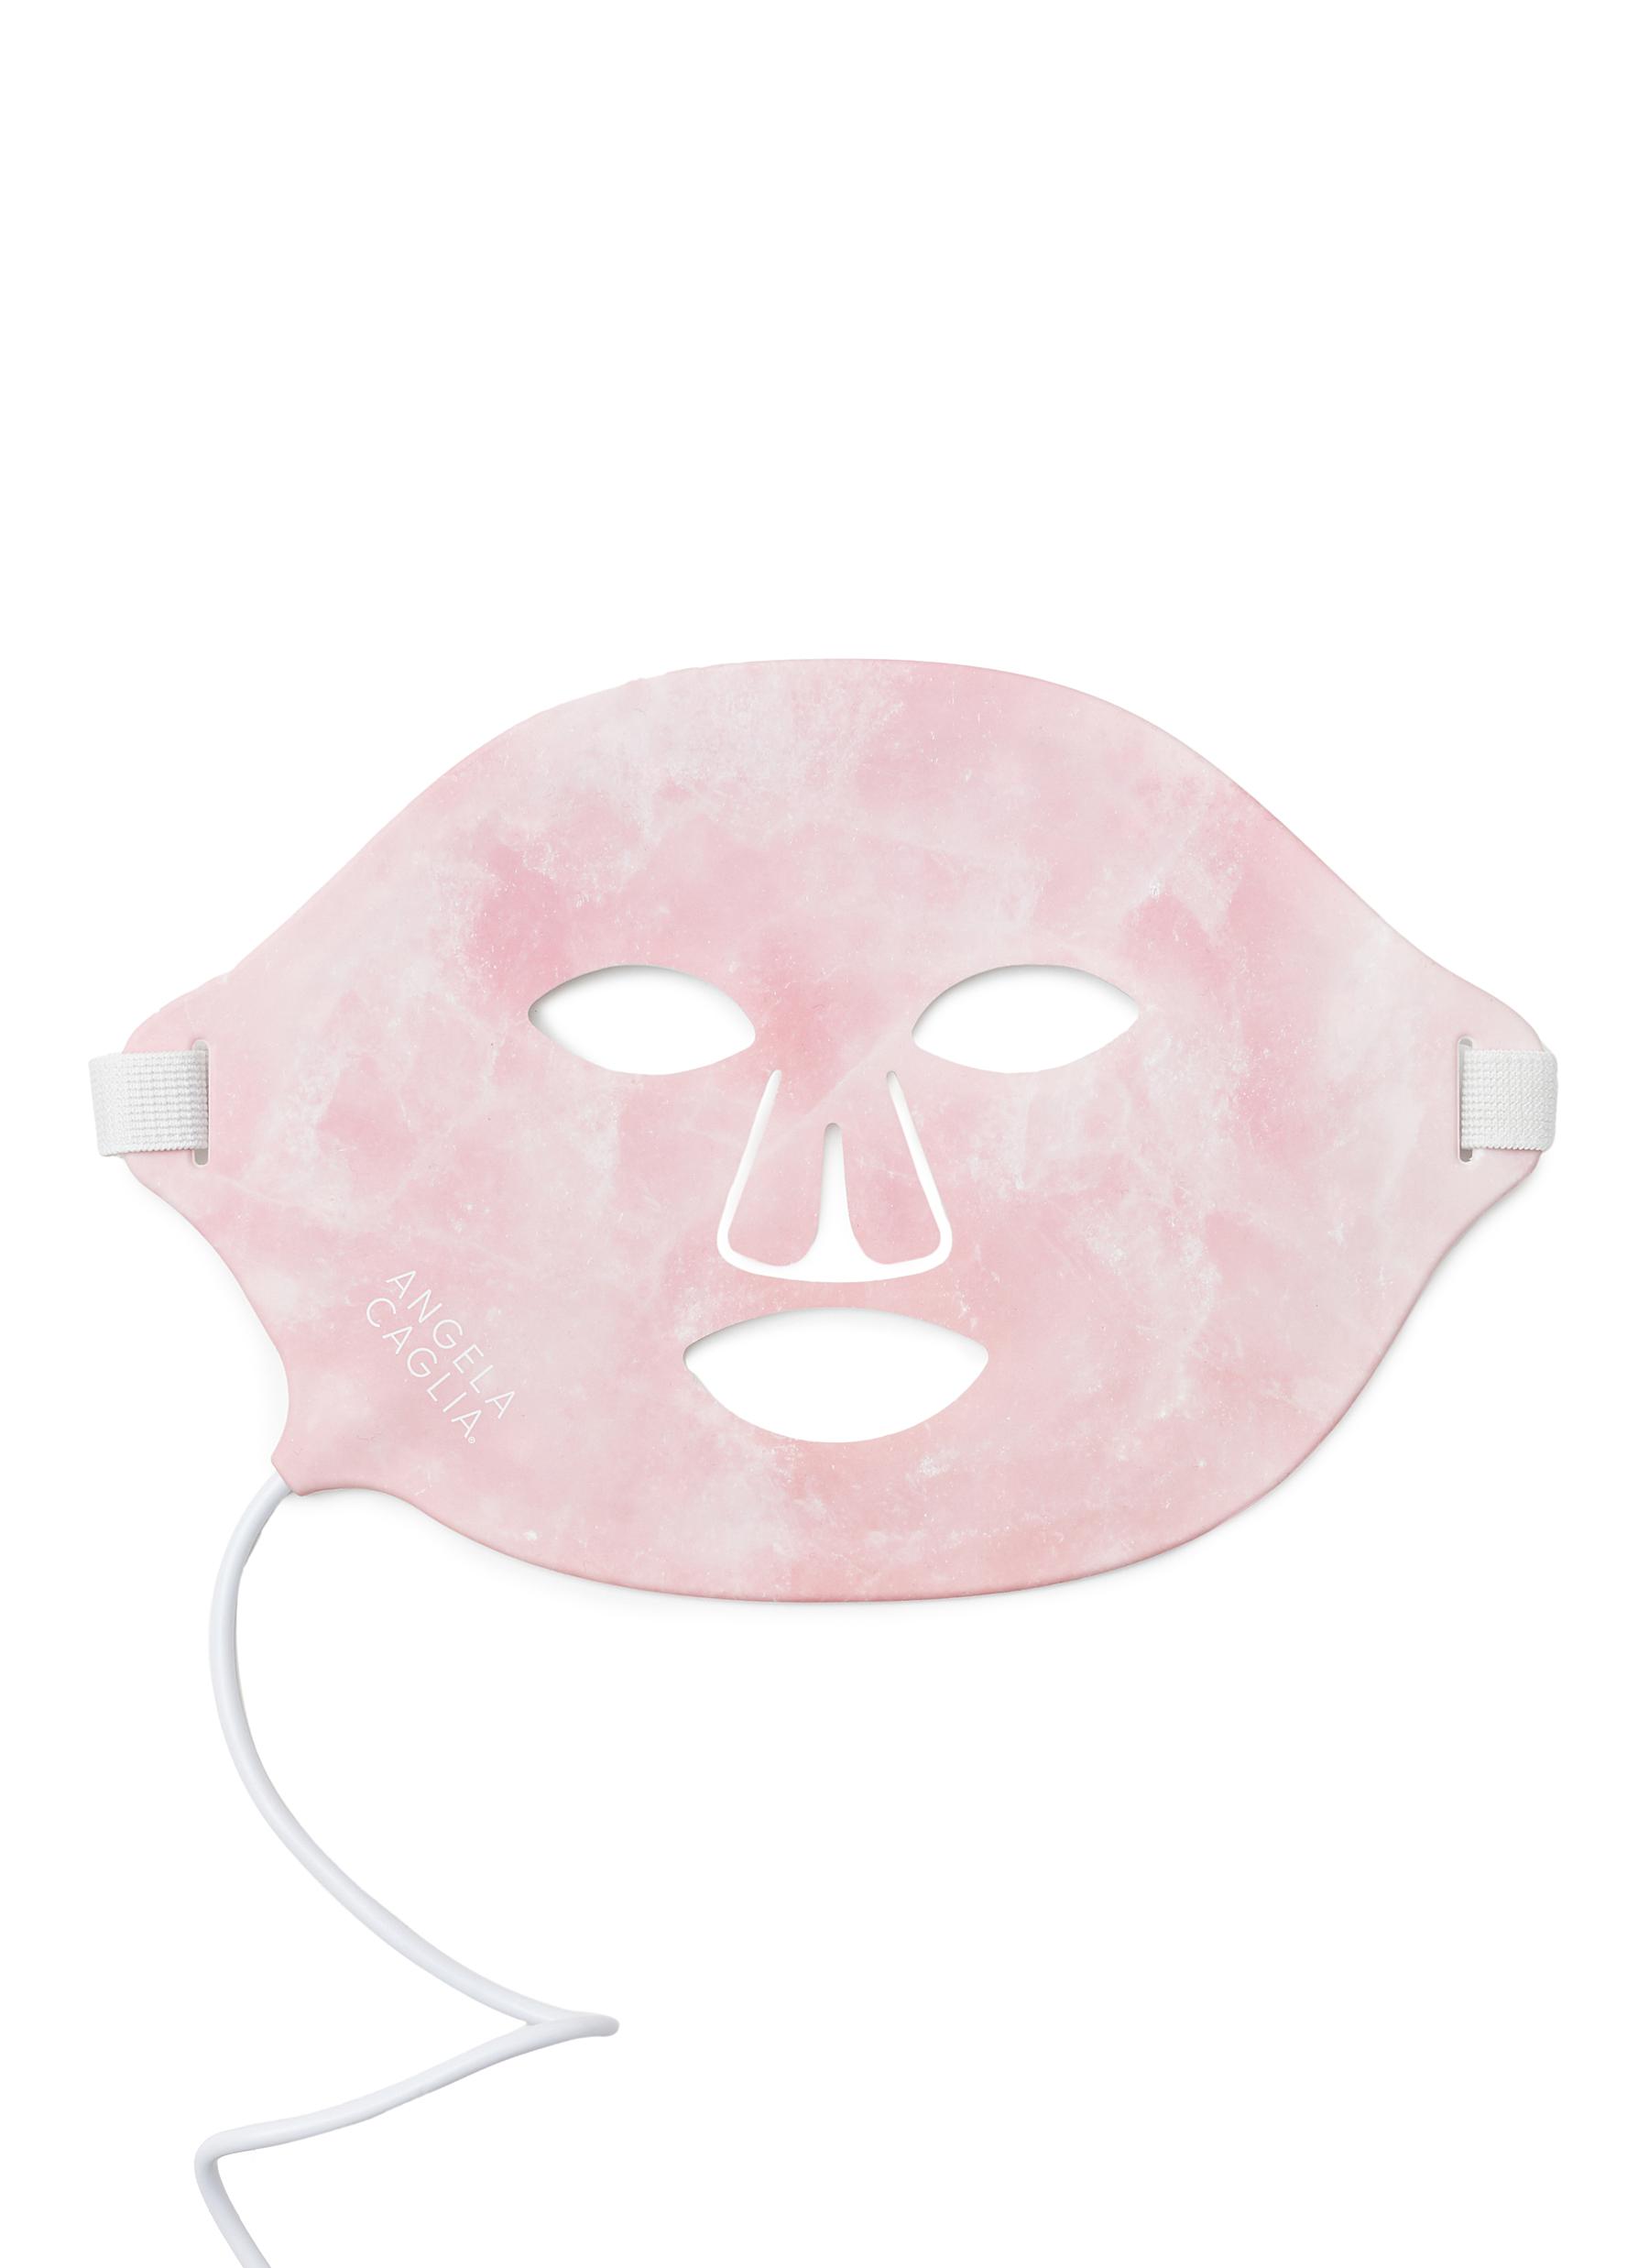 Crystal LED Super Anti-Ageing Face Mask